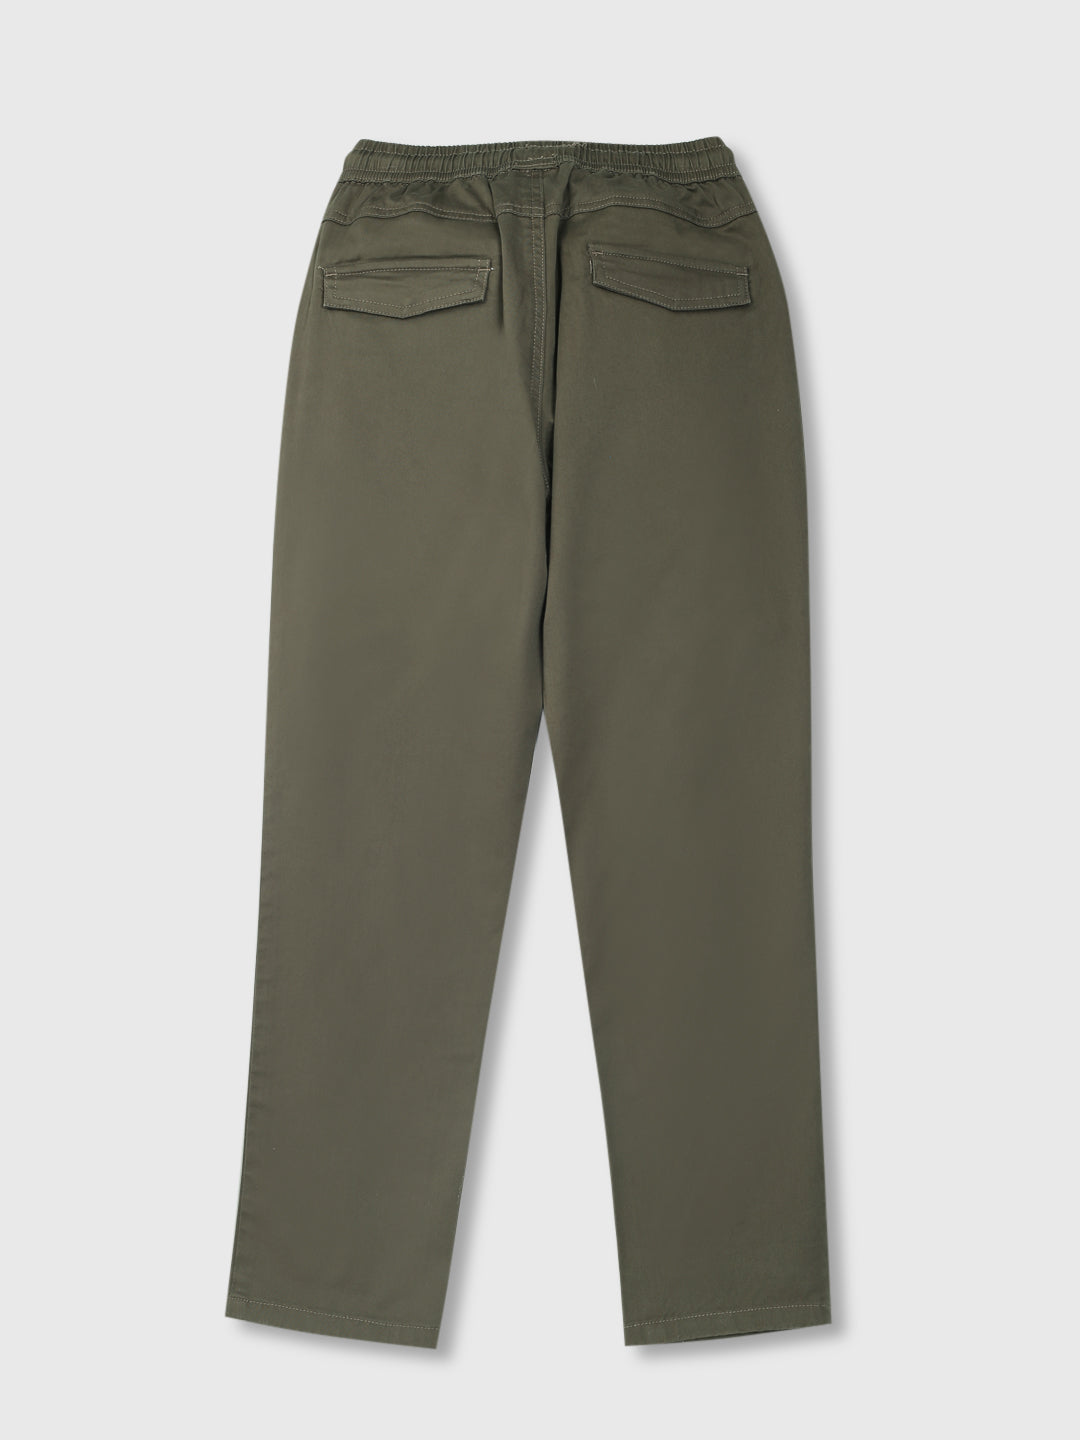 Boys Green Solid Cotton Trouser